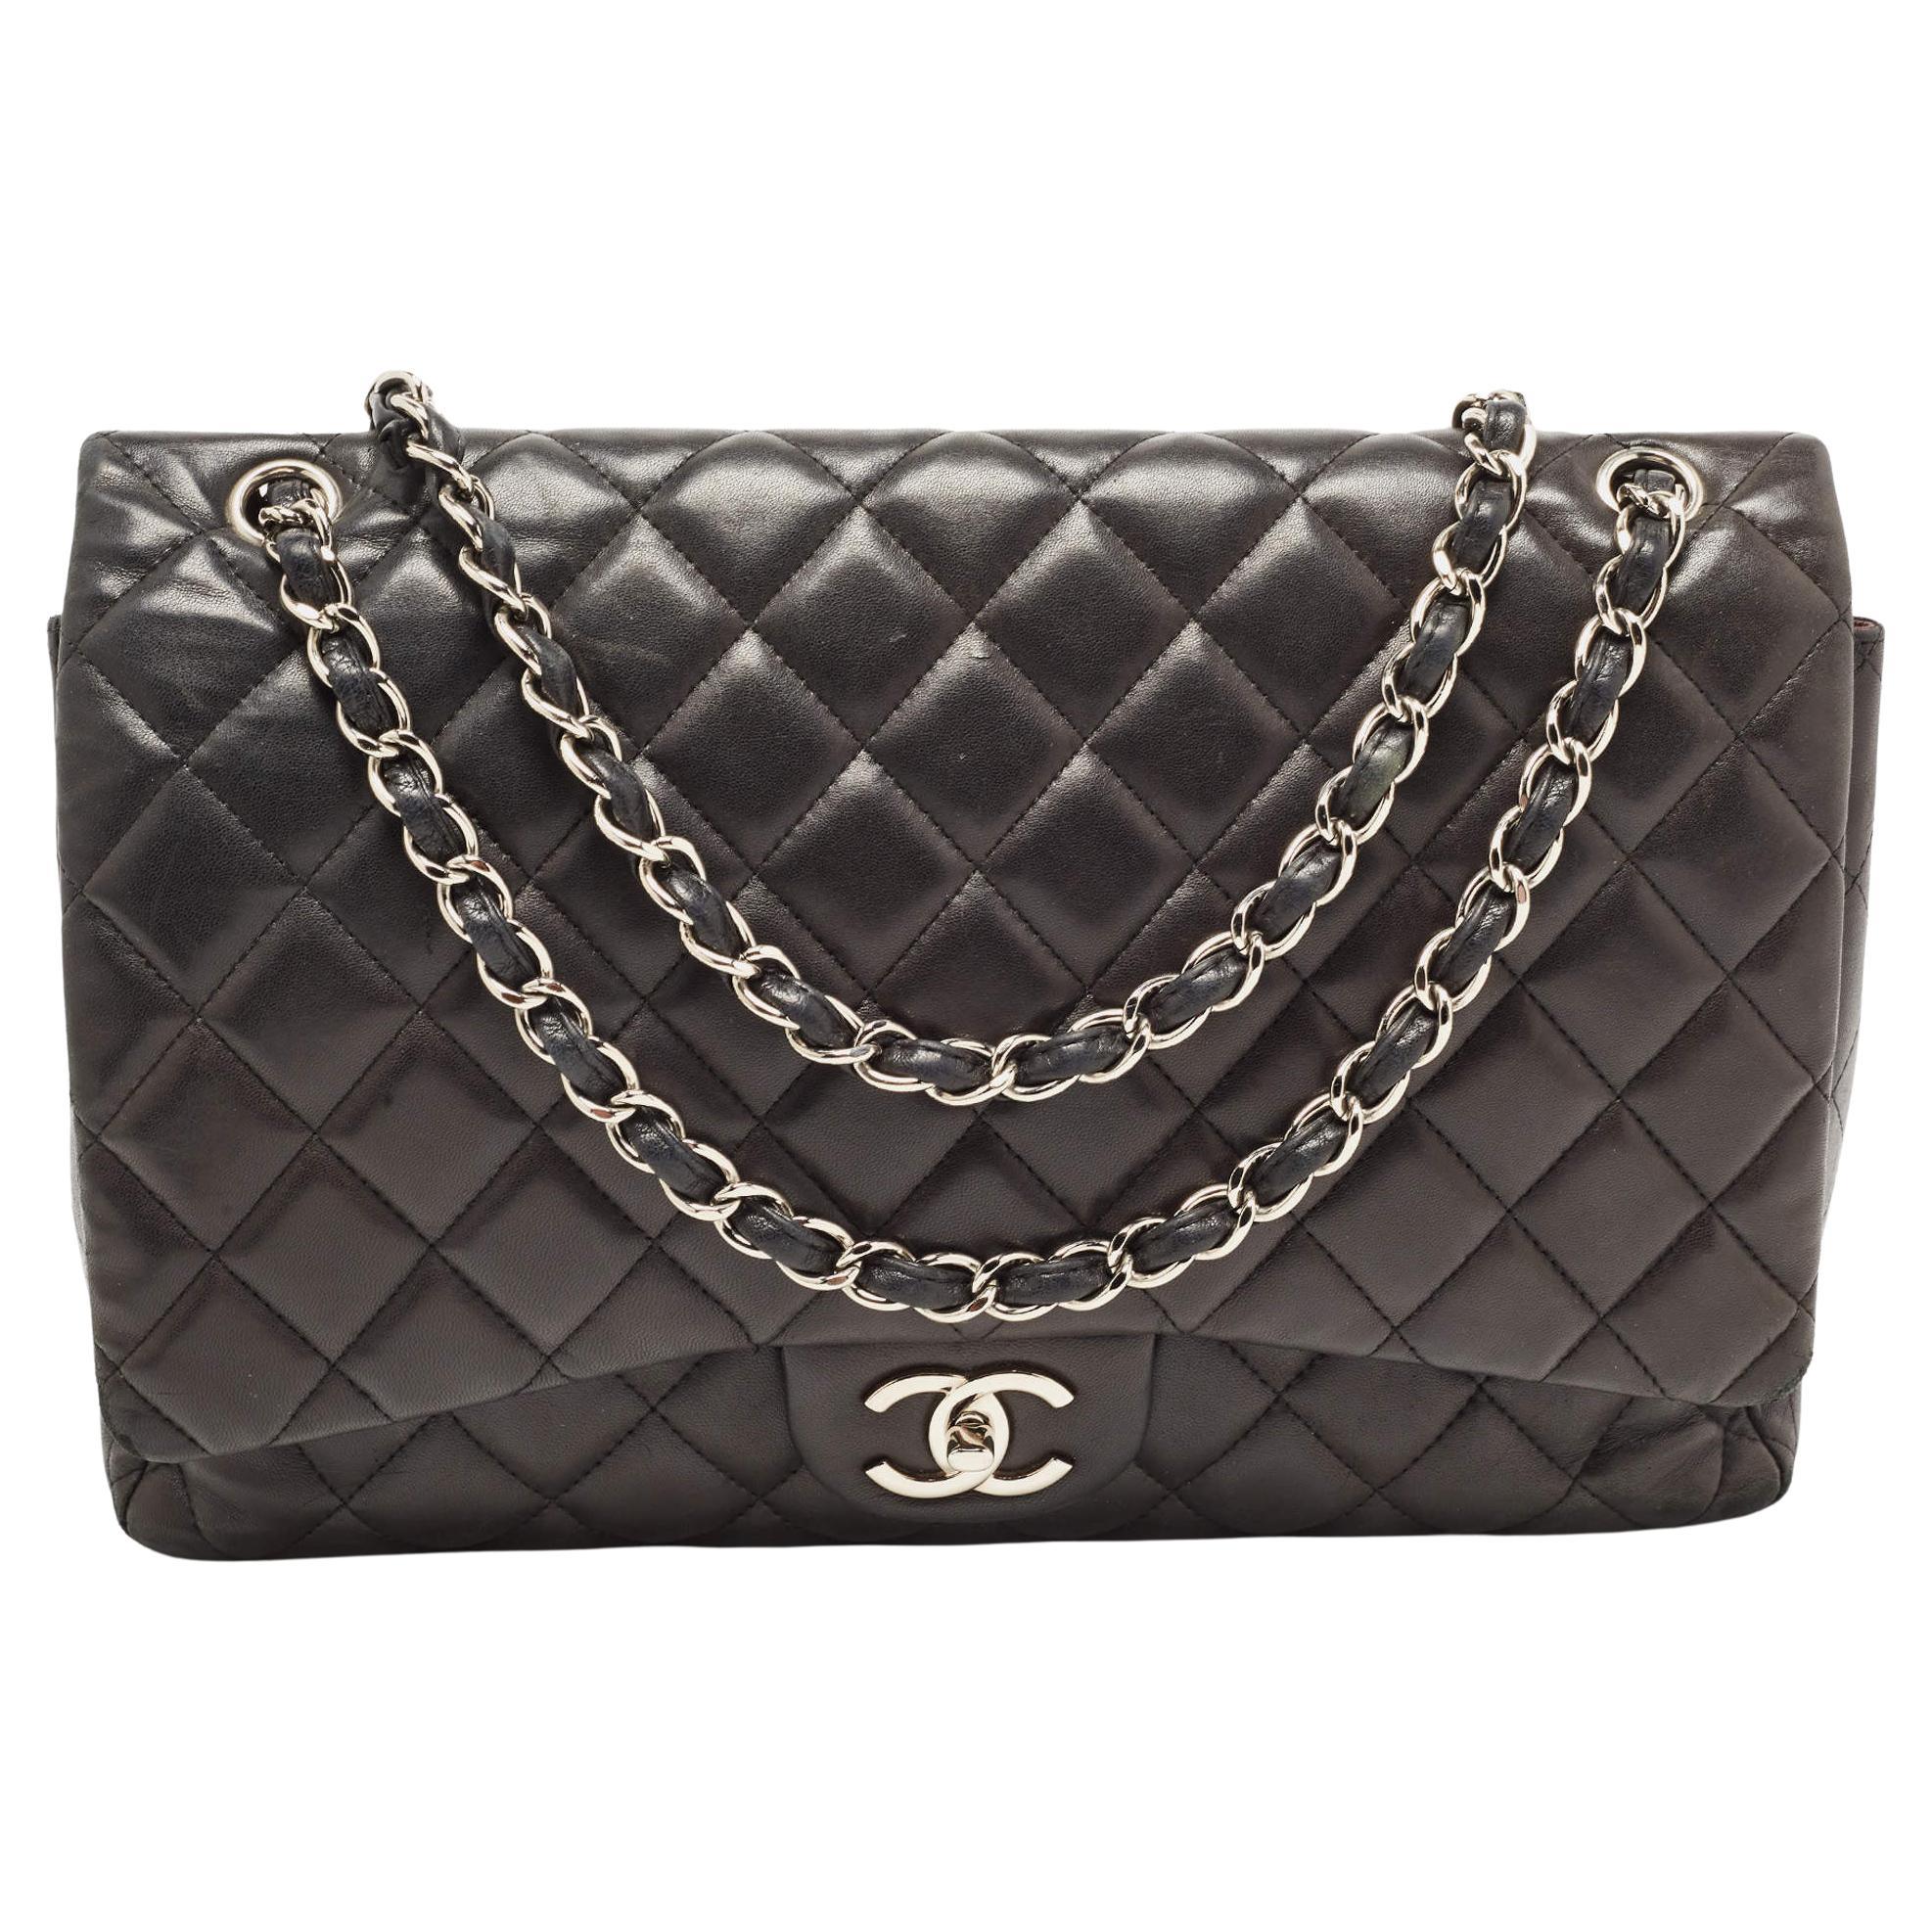 Chanel Black Quilted Leather Maxi Classic Double Flap Bag For Sale